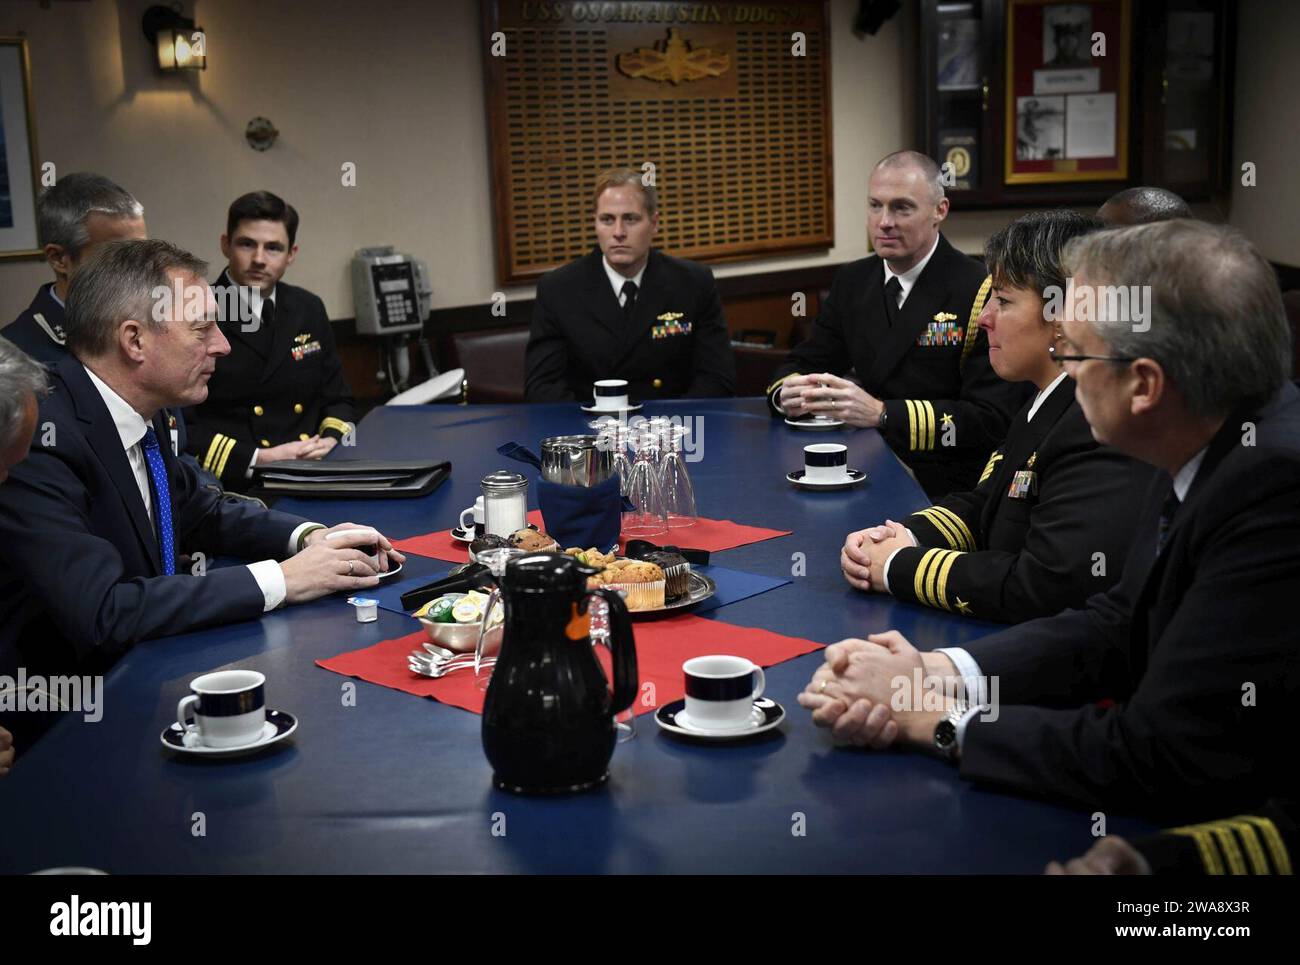 US military forces. 171030UY653-025  OSLO, Norway (Oct. 30, 2017) Norwegian Defense Minister Frank Bakke-Jensen   speaks with Sailors aboard the Arleigh Burke-class guided-missile destroyer USS Oscar Austin (DDG 79) Oct. 30, 2017. Oscar Austin is on a routine deployment supporting U.S. national security interests in Europe, and increasing theater security cooperation and forward naval presence in the U.S. 6th Fleet area of operations. (U.S. Navy photo by Mass Communication Specialist 2nd Class Ryan Utah Kledzik/Released) Stock Photo